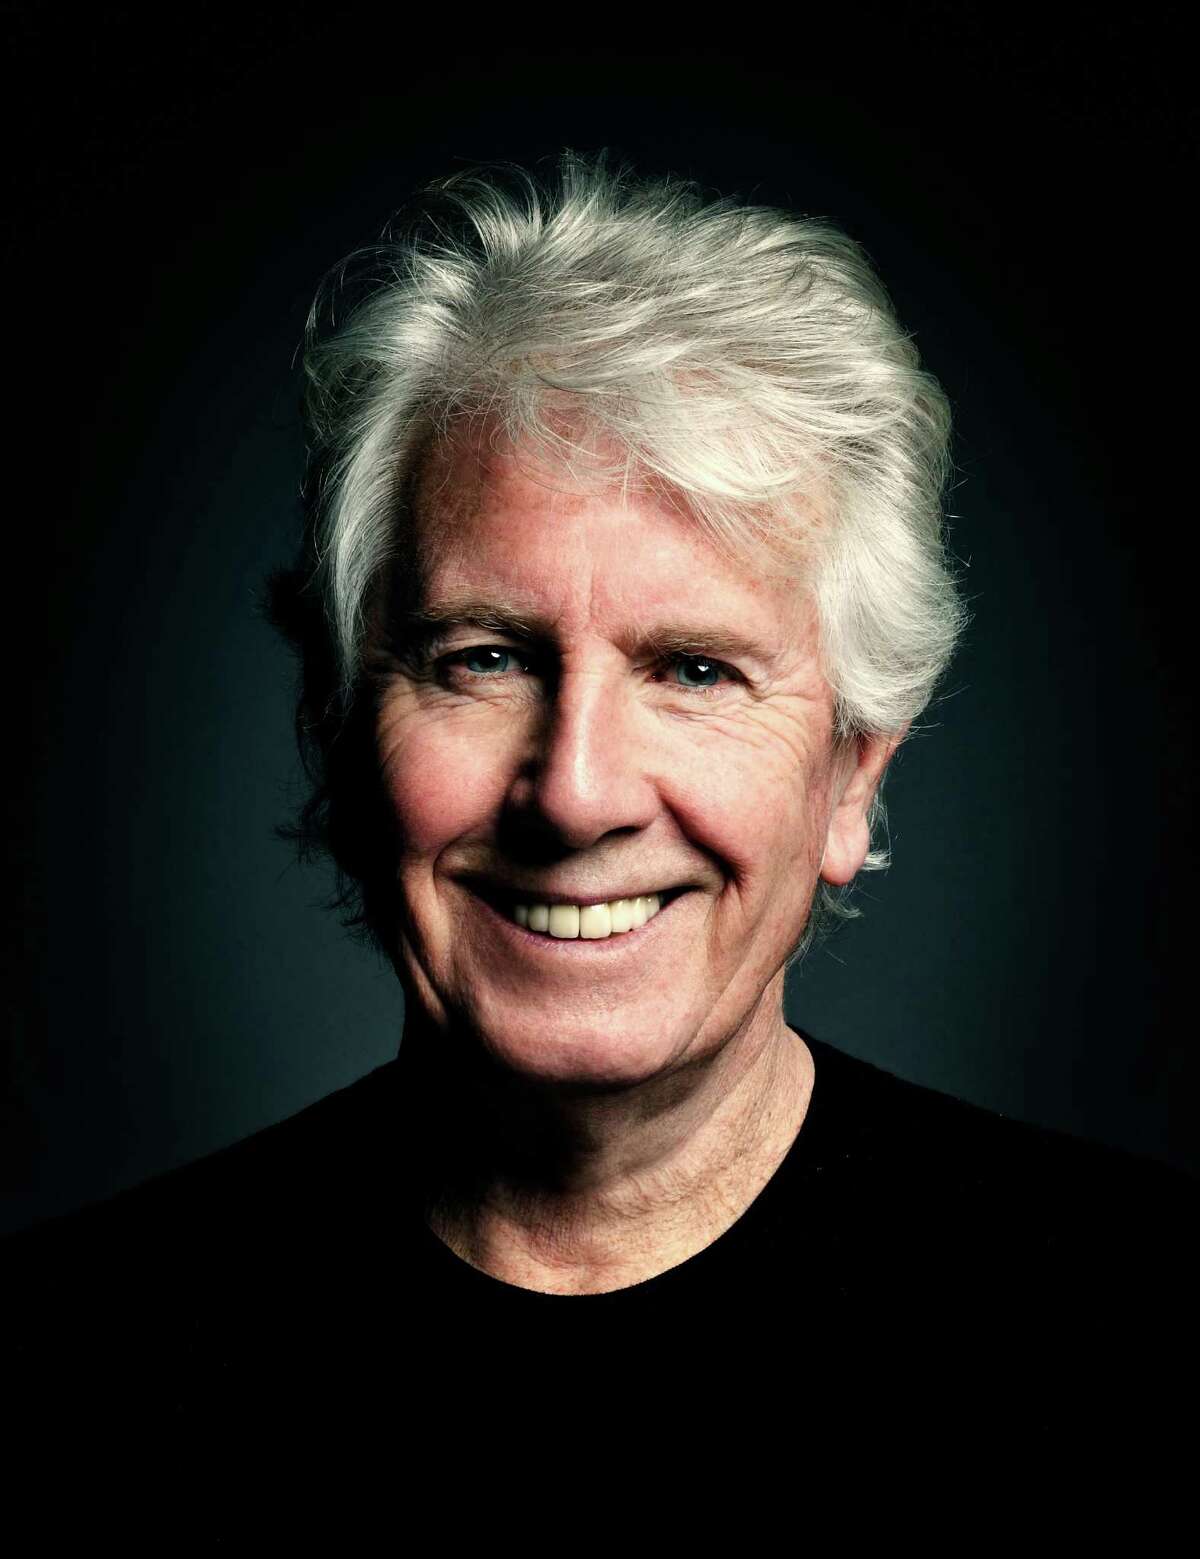 Graham Nash performs at The Ridgefield Playhouse on Wednesday, Sept. 11. He'll do a mix of old and new music. Nash was inducted into the Rock and Roll Hall of Fame twice âÄî once with The Hollies in 2010, and once with Crosby, Stills & Nash in 1997. He's known for classics such as âÄúTeach Your ChildrenâÄù and âÄúOur House,âÄù among many others.